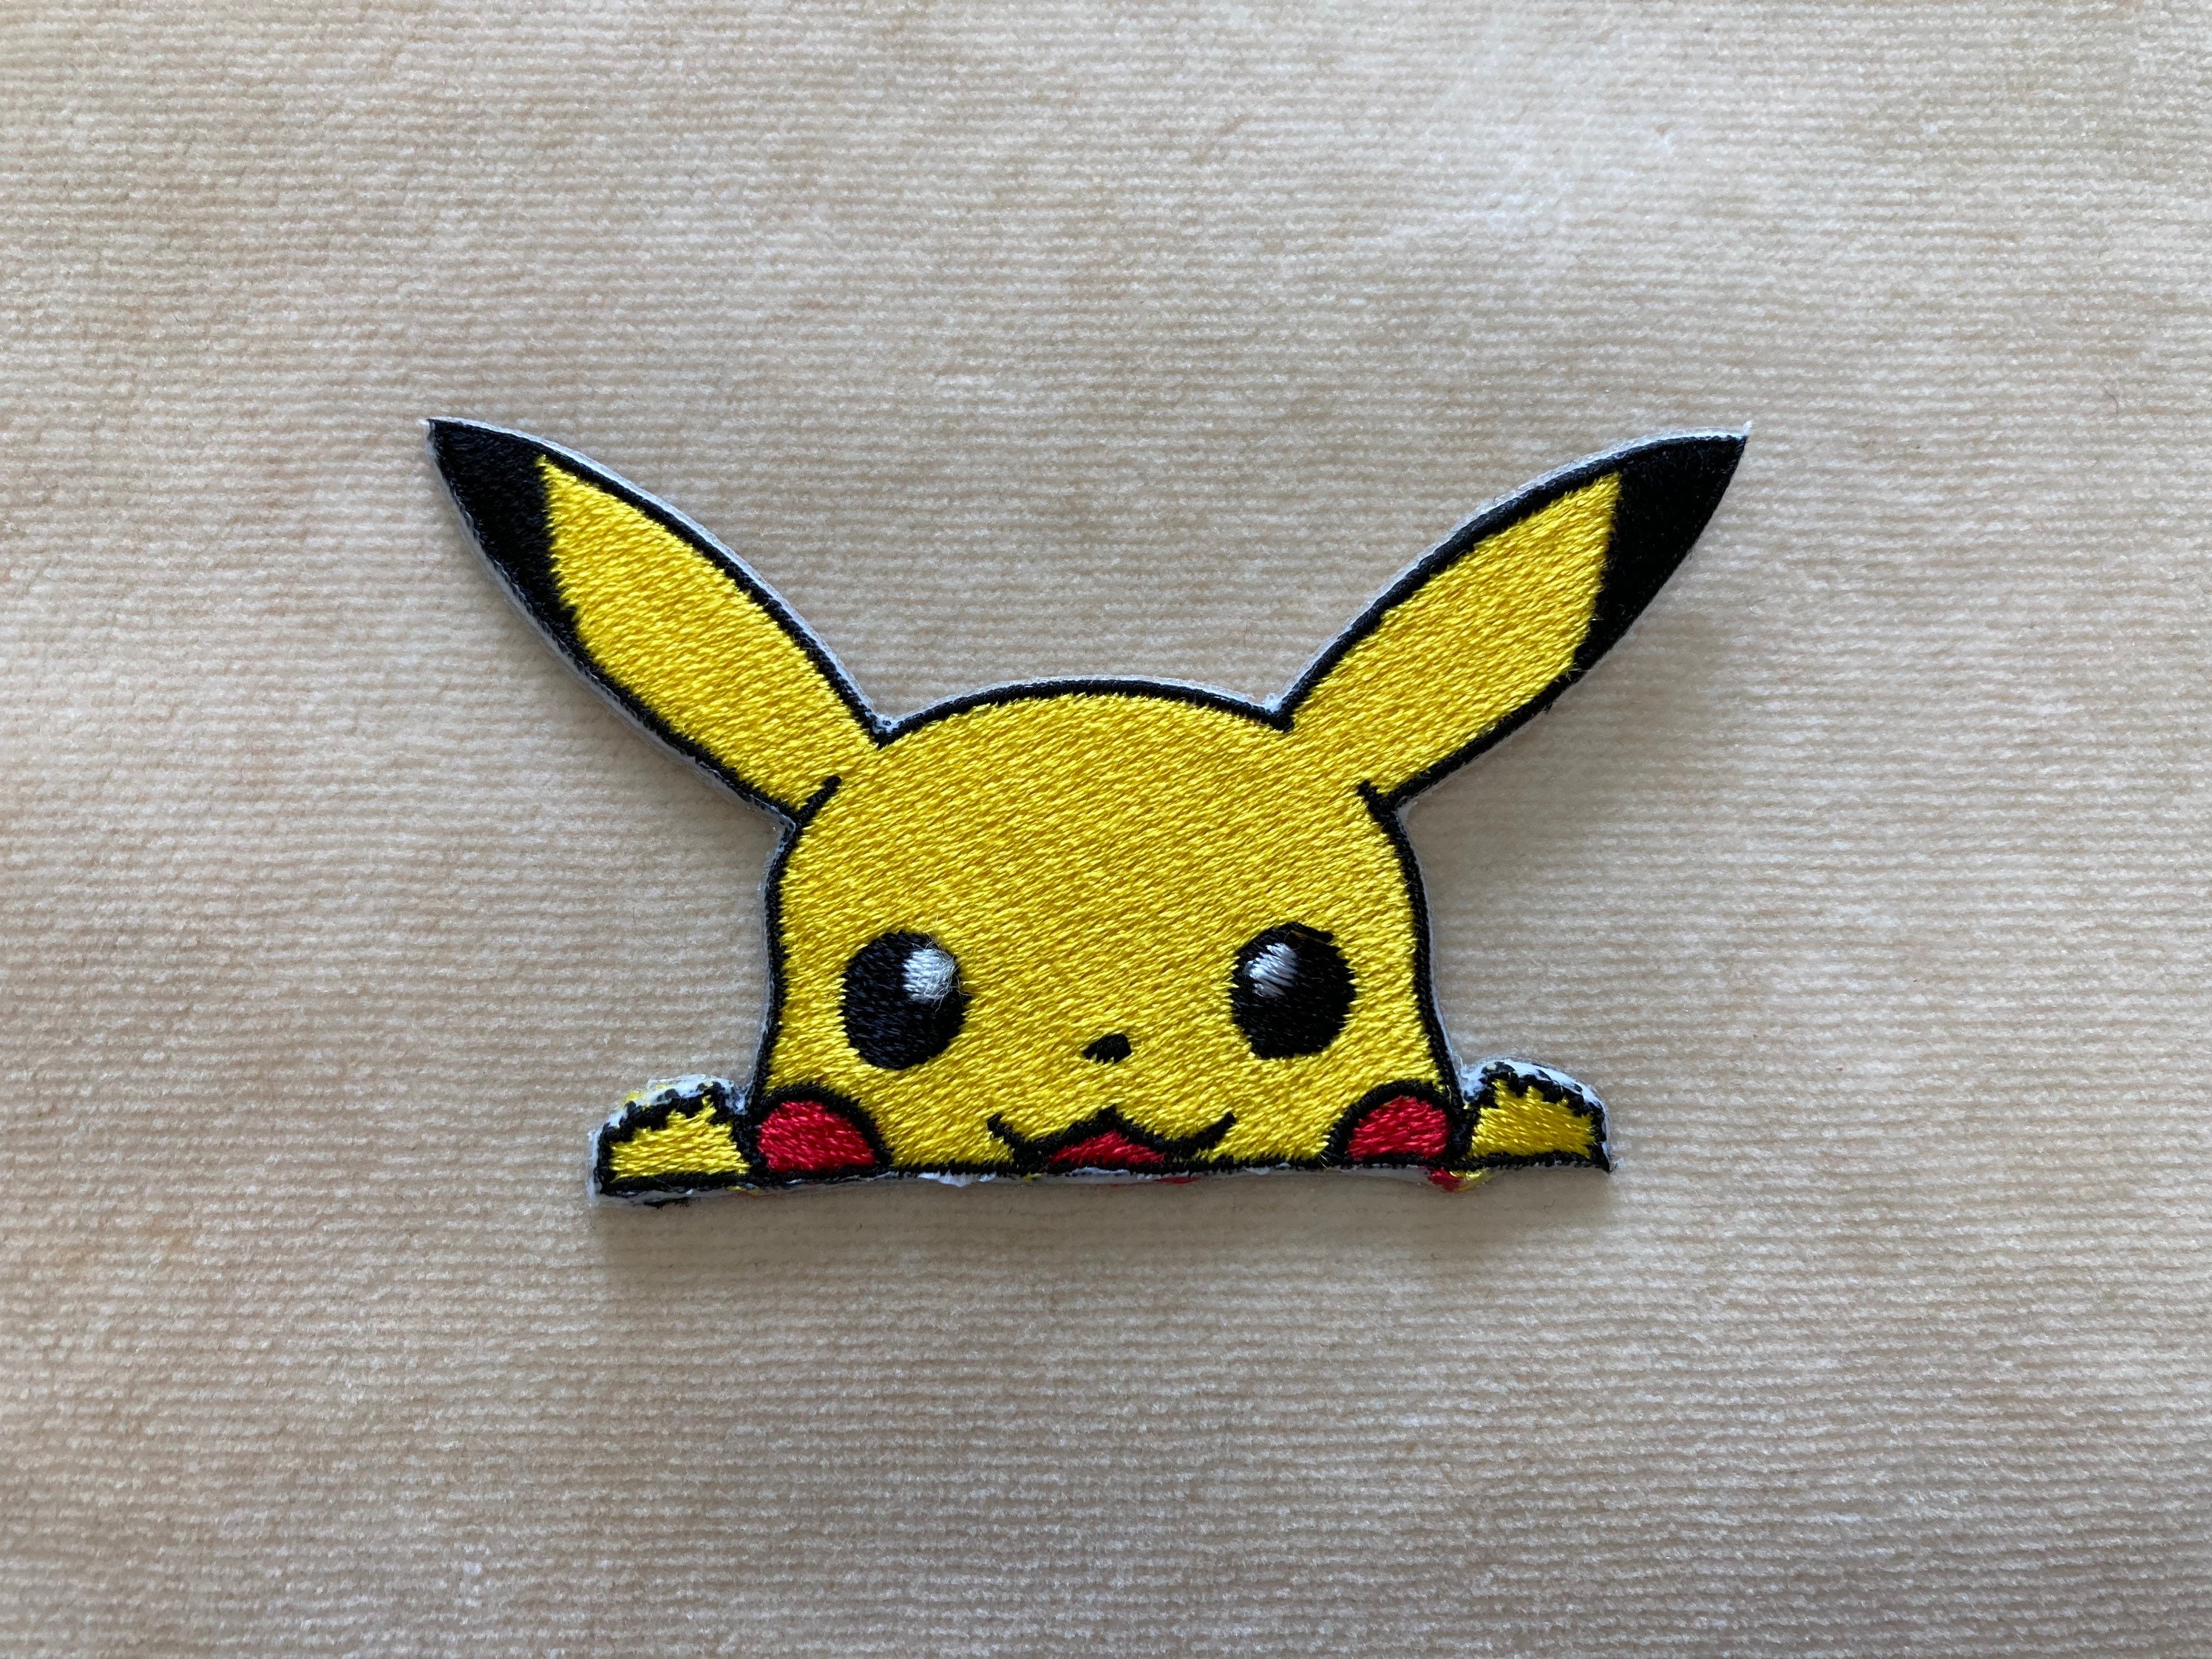 Anime Pokemon Pikachu Patches for Clothing Japan Iron on Patches Clothes  Heat Transfer Stickers for Boy